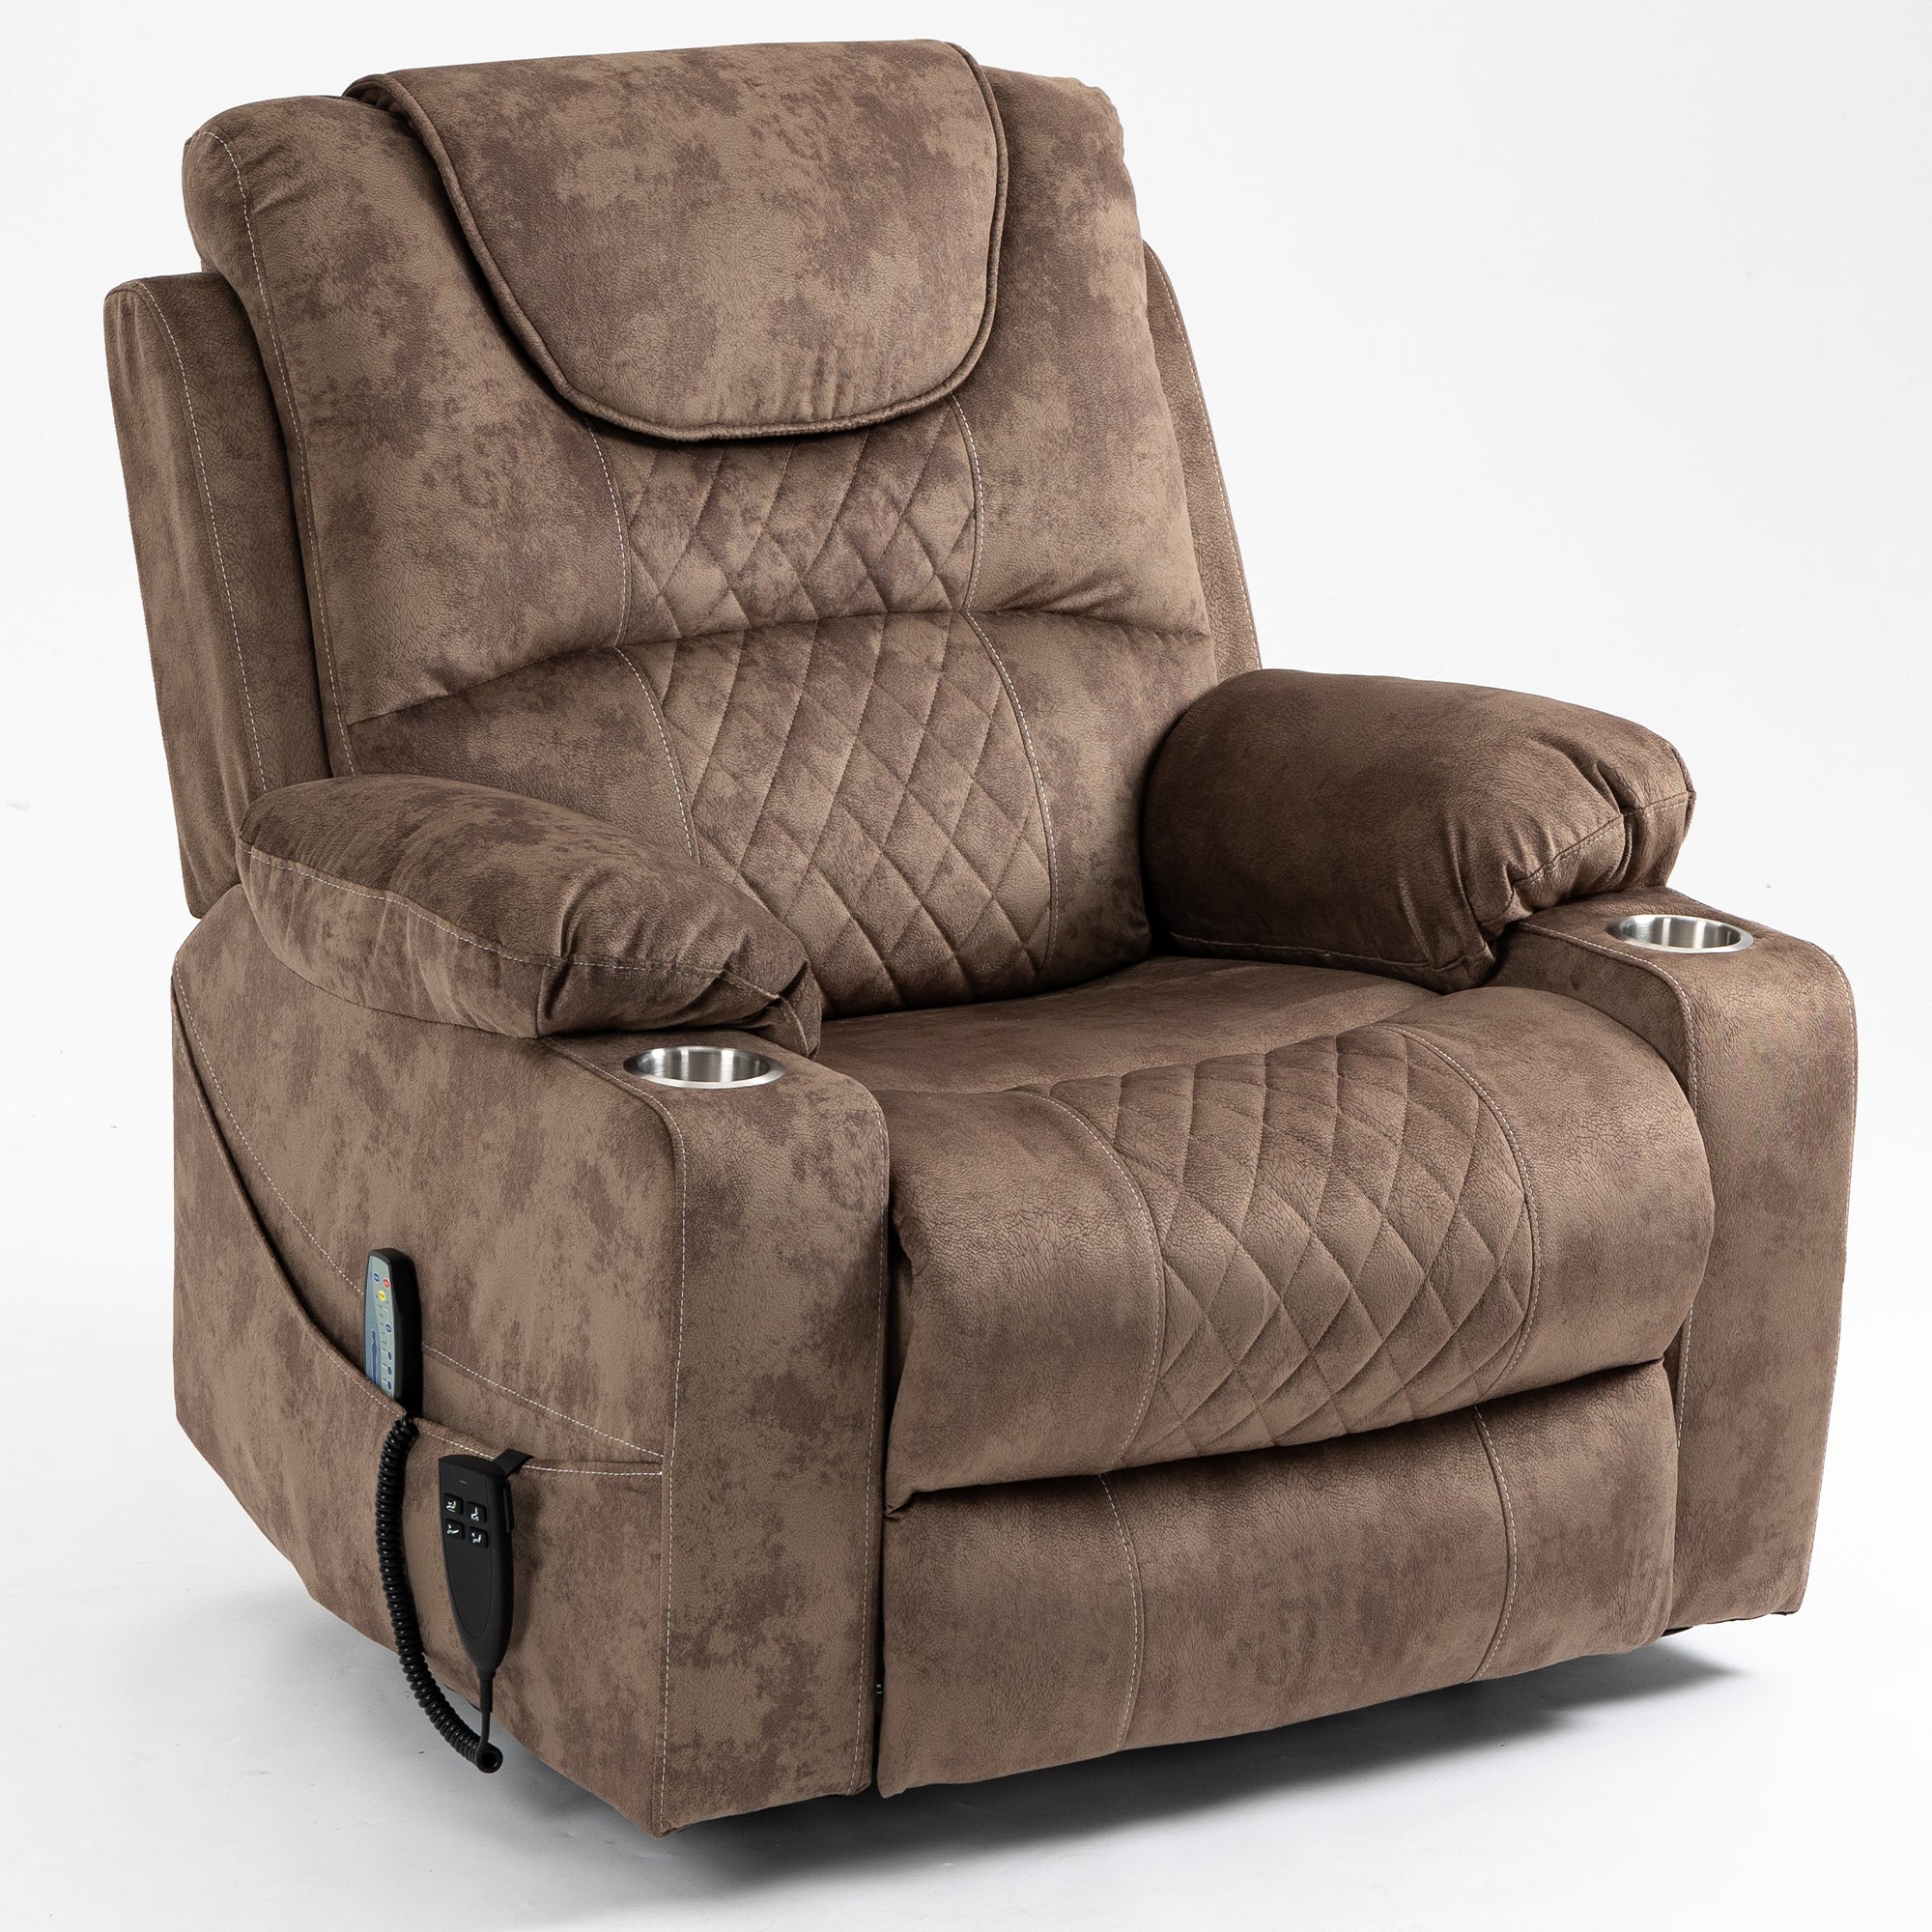 uhomepro Large Electric Massage Recliner with Heat, Fabric Lift Reclin -  Uhomepro